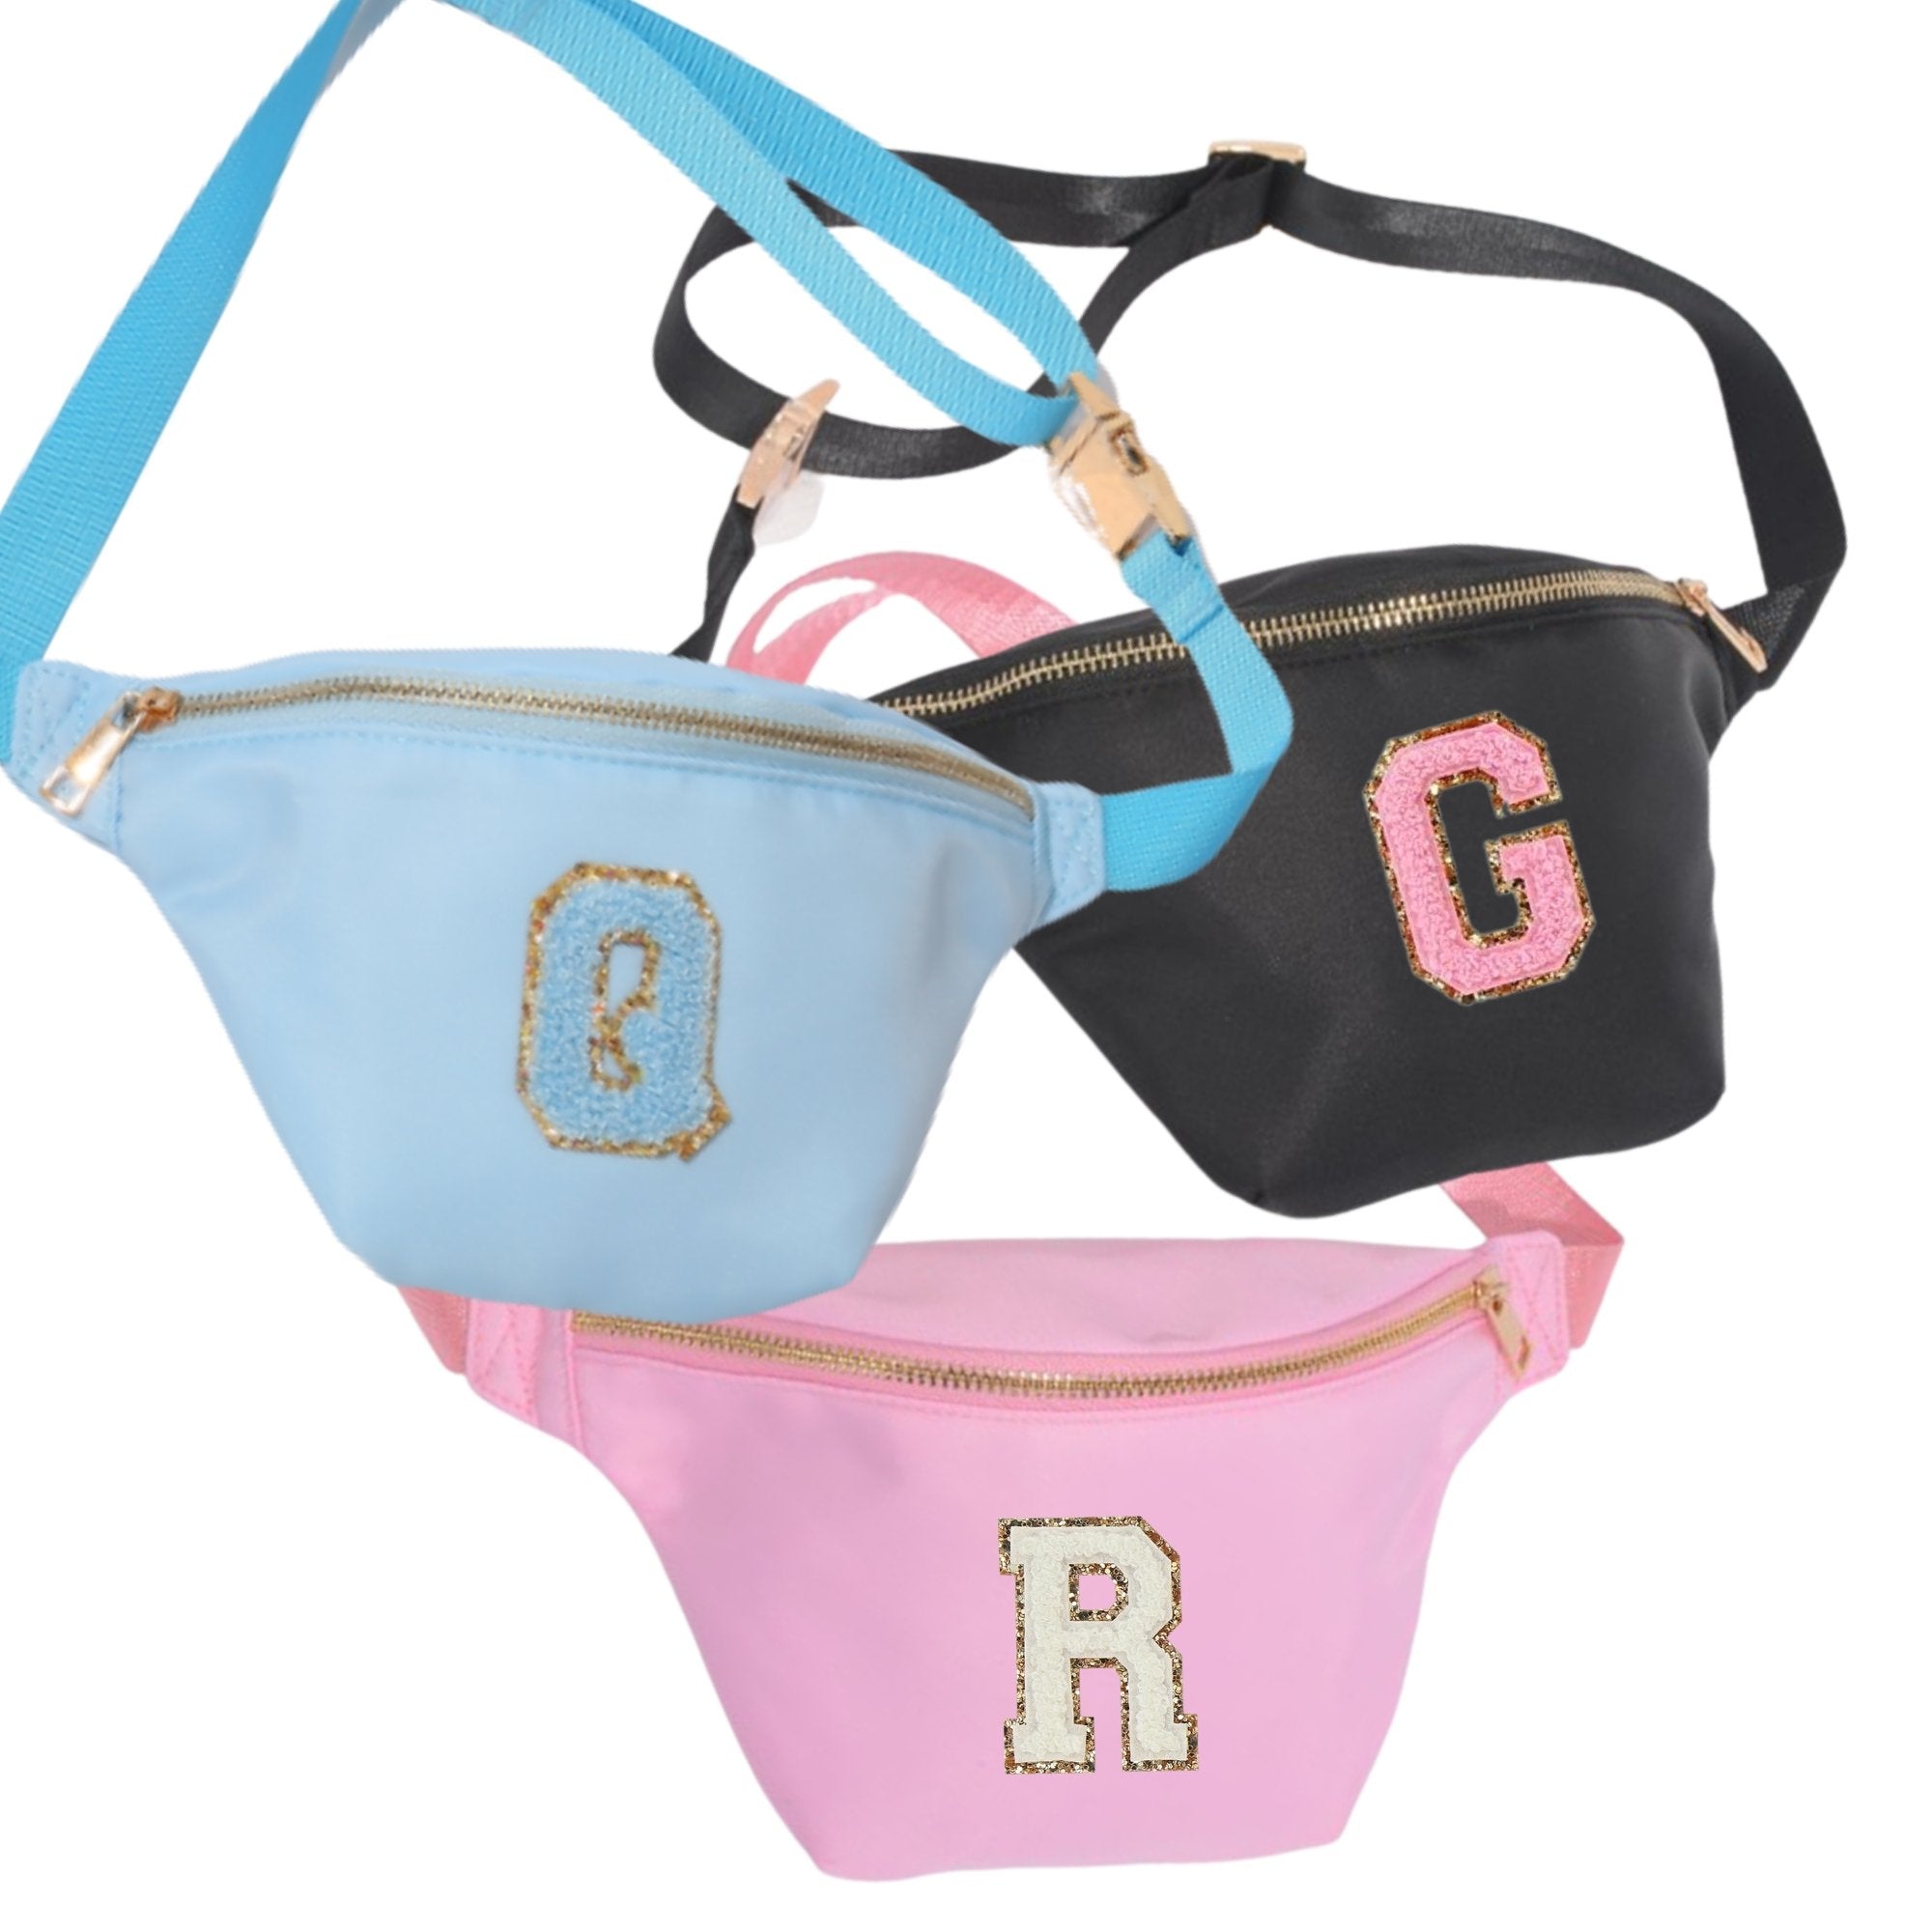 Nylon Fanny Pack - Sprinkled With Pink #bachelorette #custom #gifts